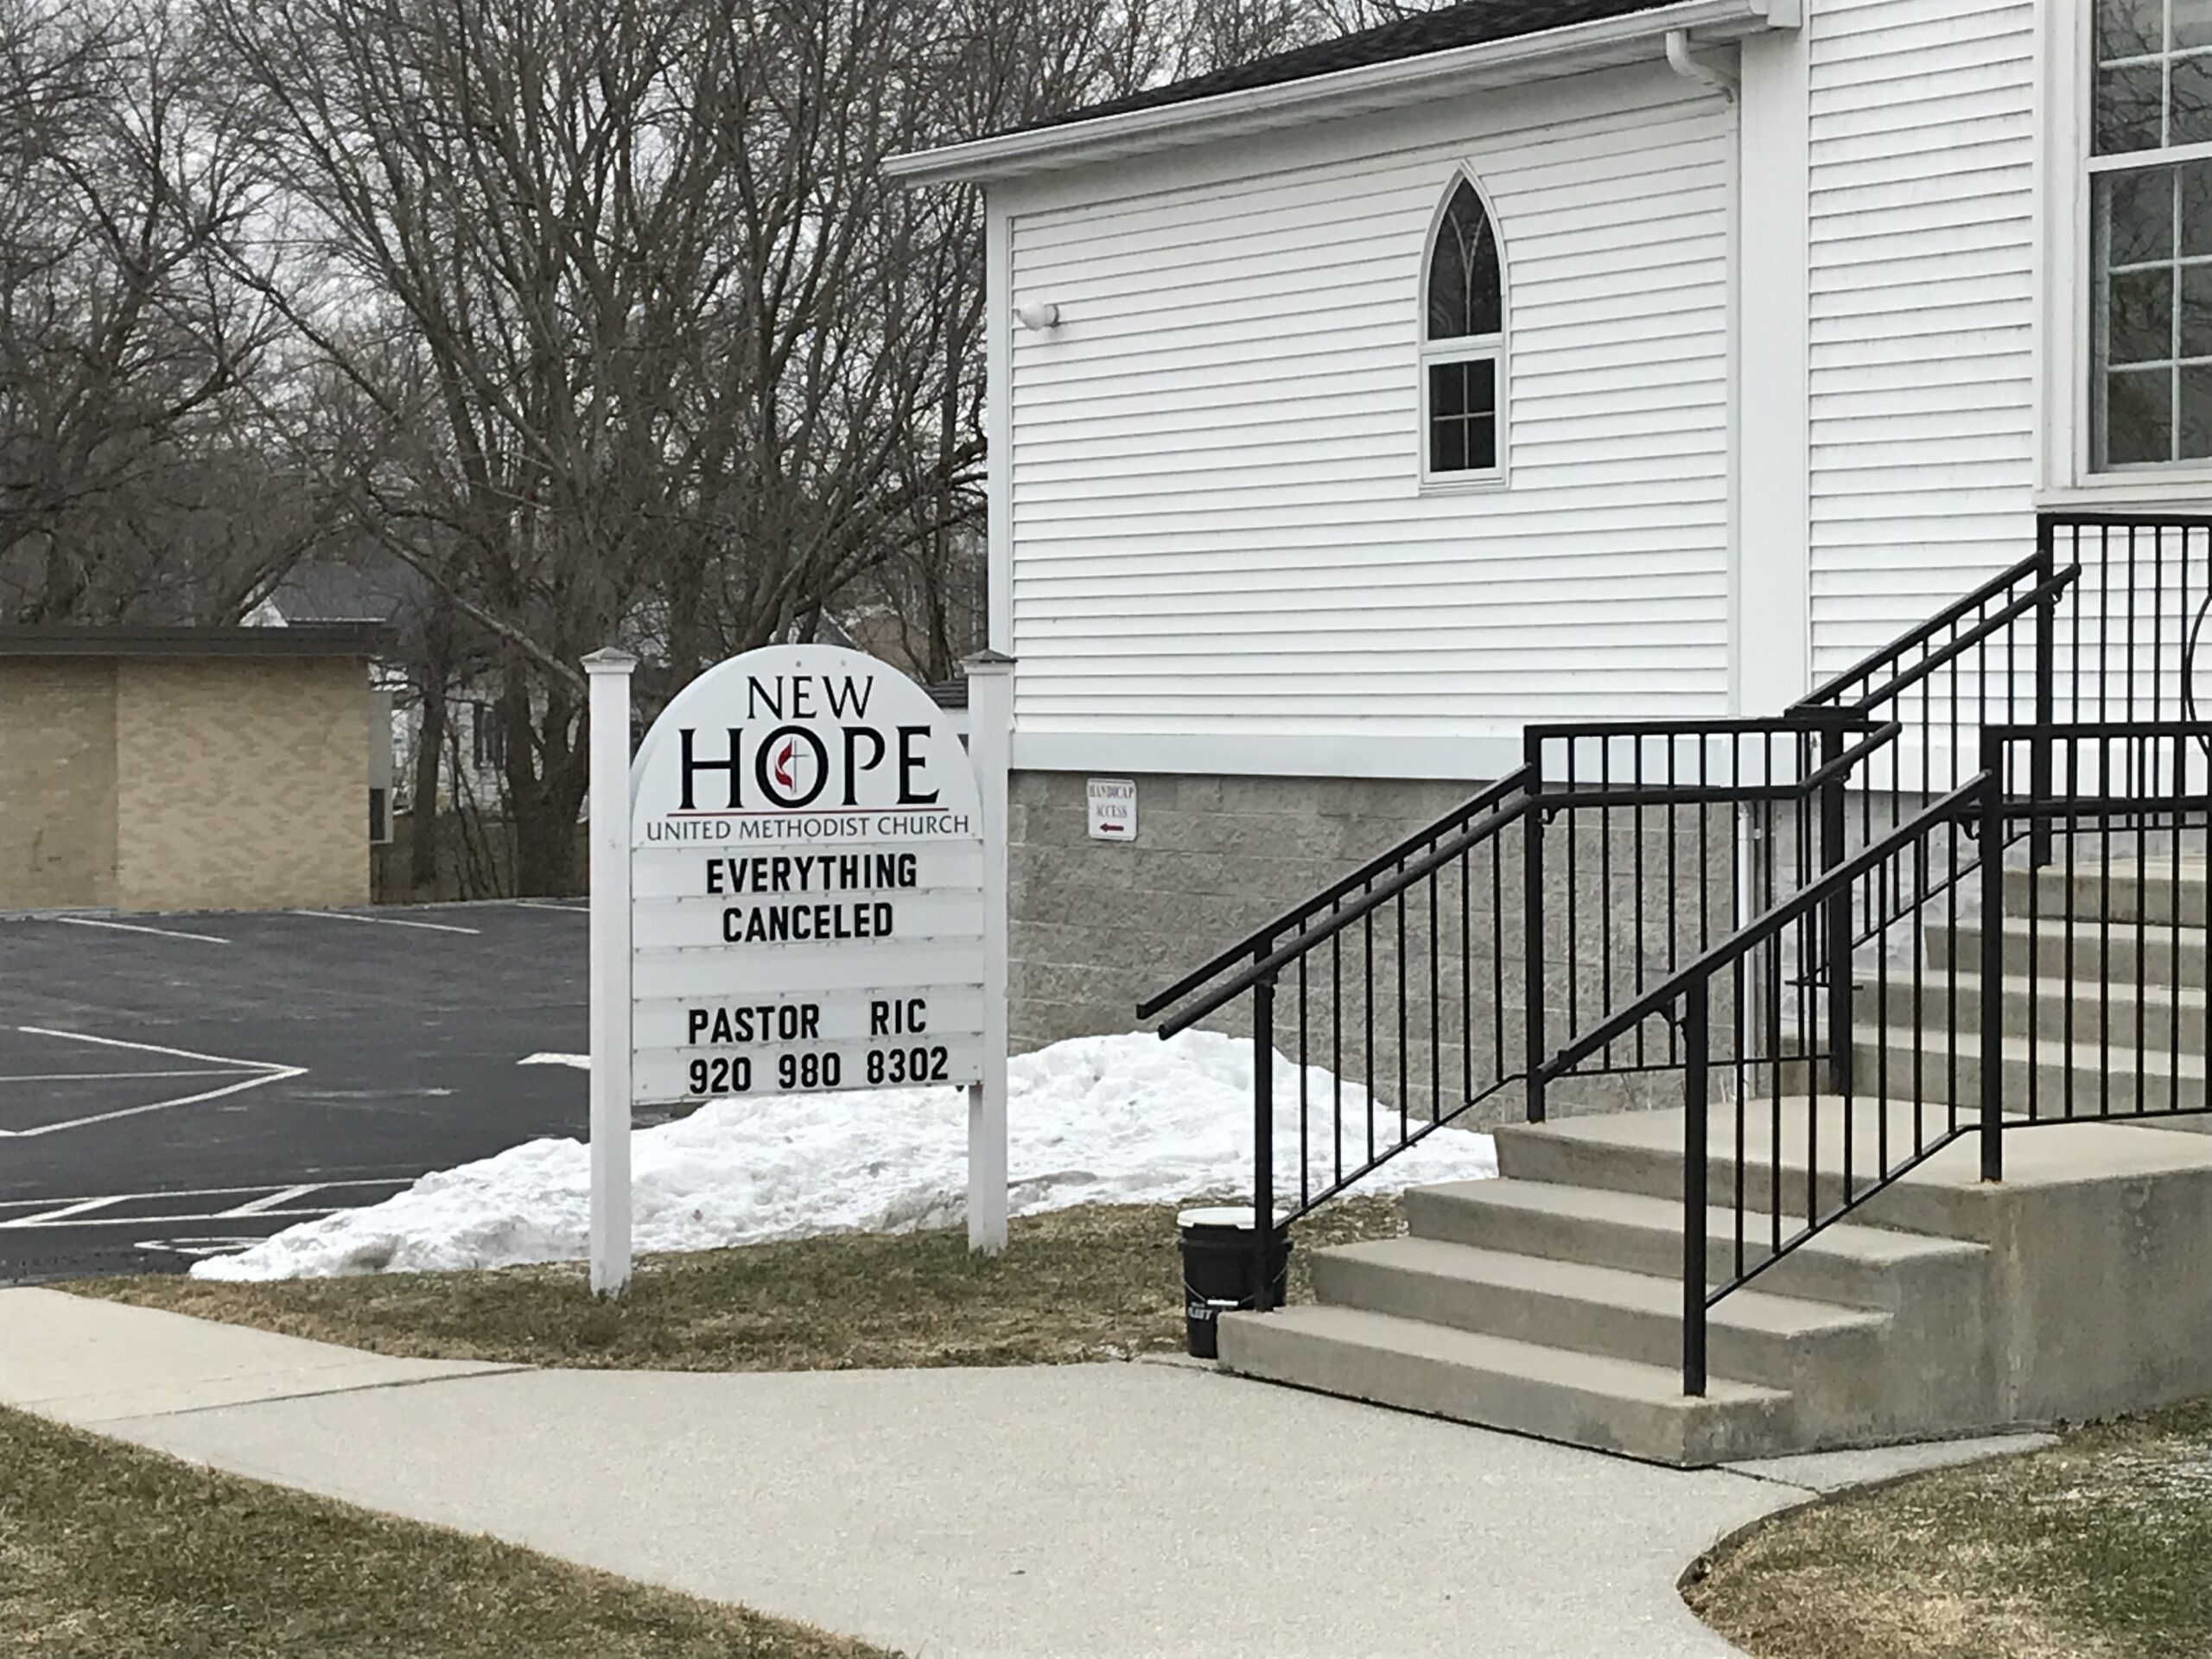 Church in Greenbush, Wisconsin, in March 2020, during the pandemic. (Awkwafaba, CC BY-SA 4.0, Wikimedia Commons)